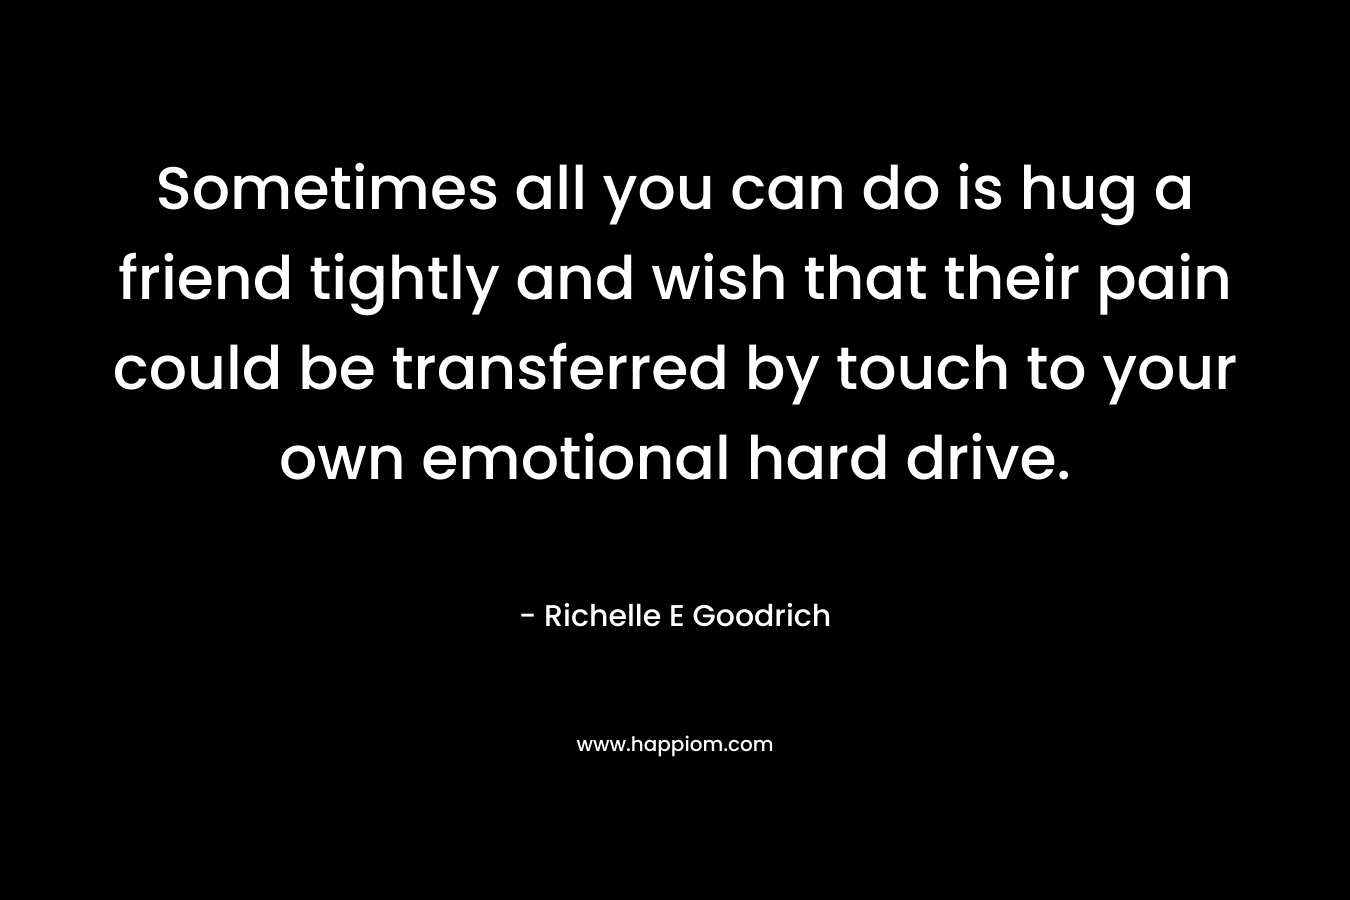 Sometimes all you can do is hug a friend tightly and wish that their pain could be transferred by touch to your own emotional hard drive.